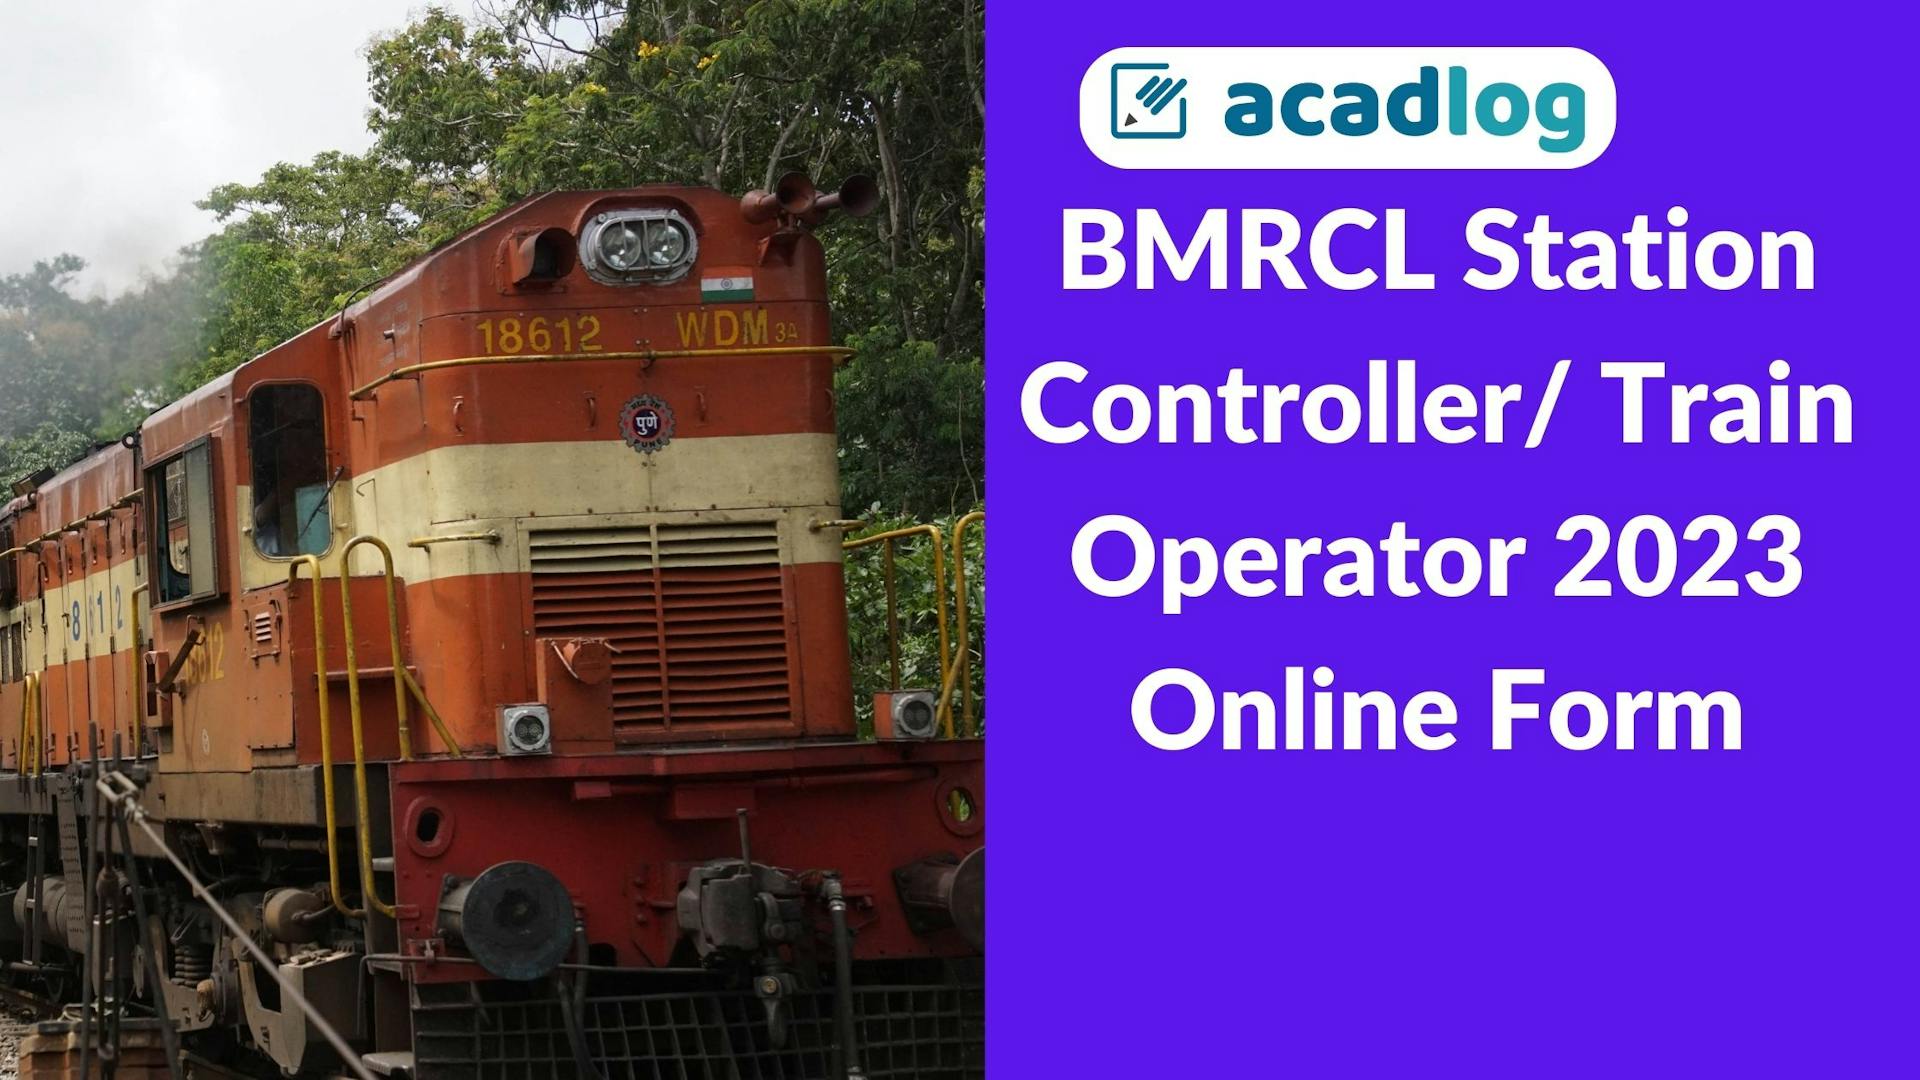 BMRCL Station Controller/ Train Operator 2023 Online Form